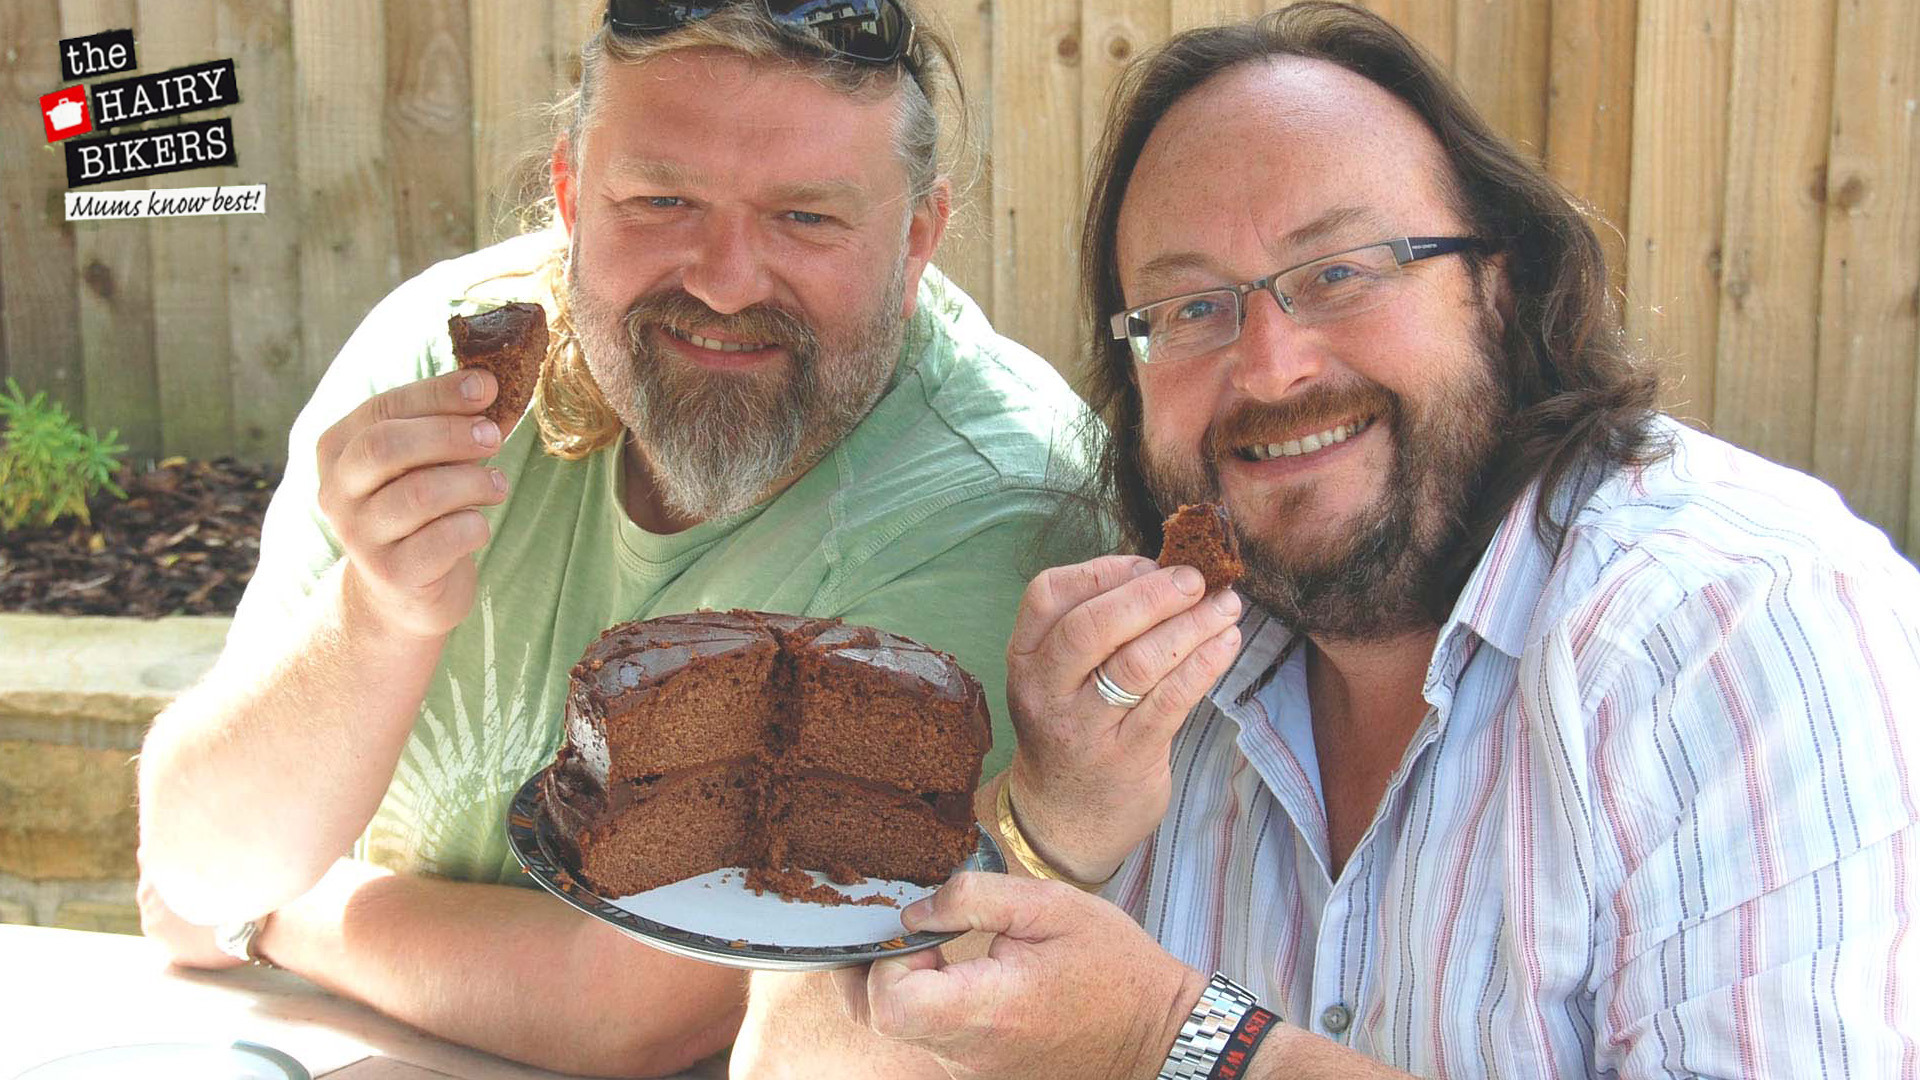 Сериал The Hairy Bikers: Mums Know Best